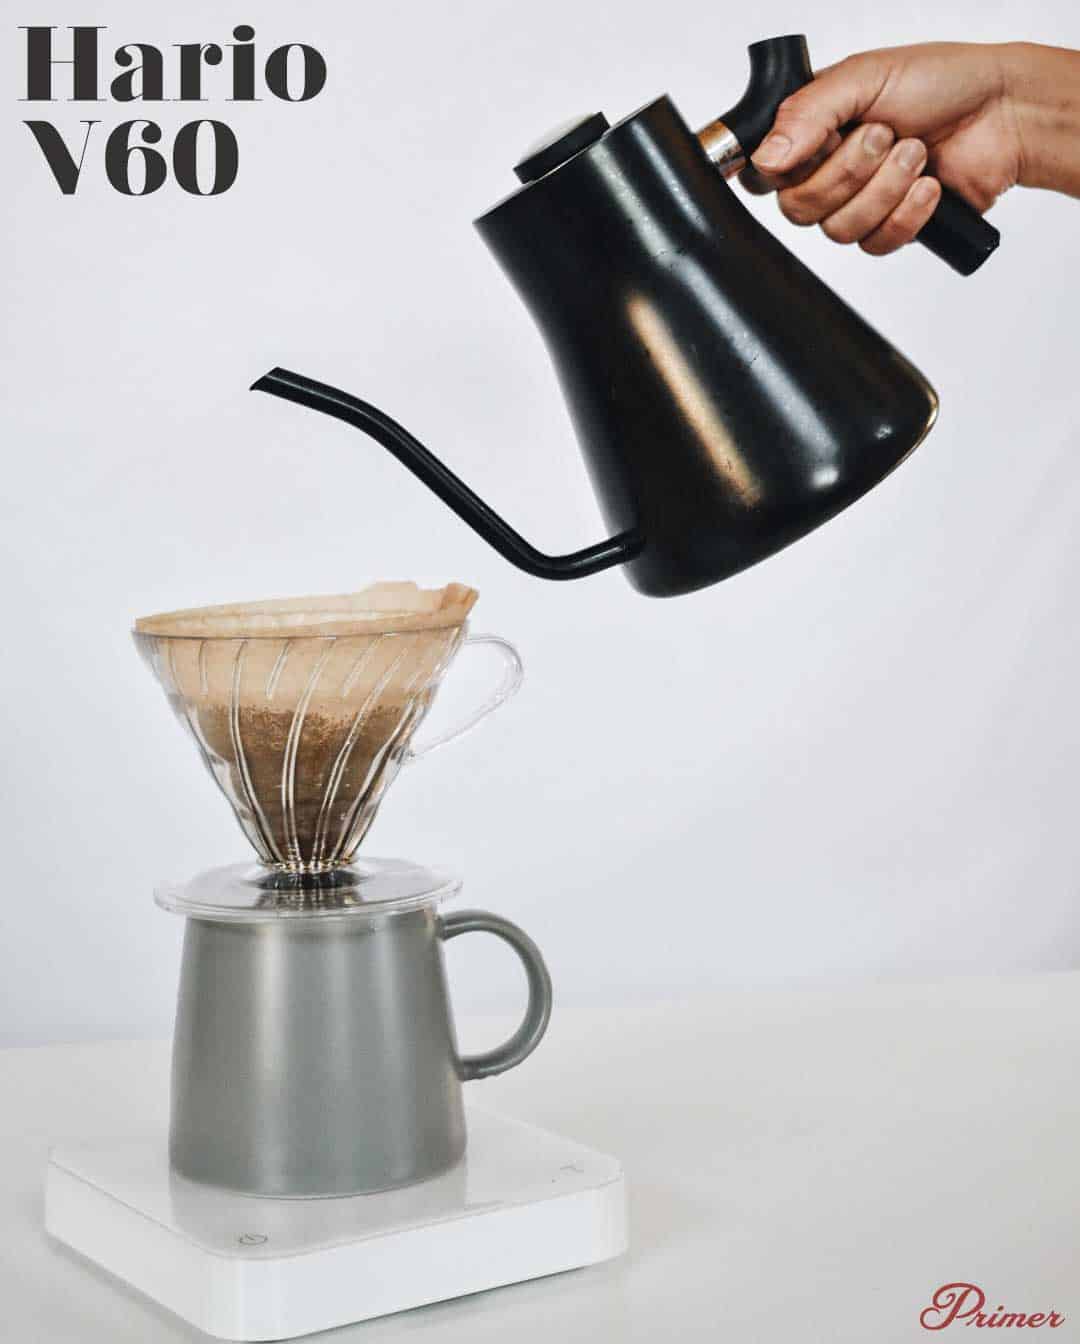 The Differences Between the Hario V60, Kalita Wave, and Chemex